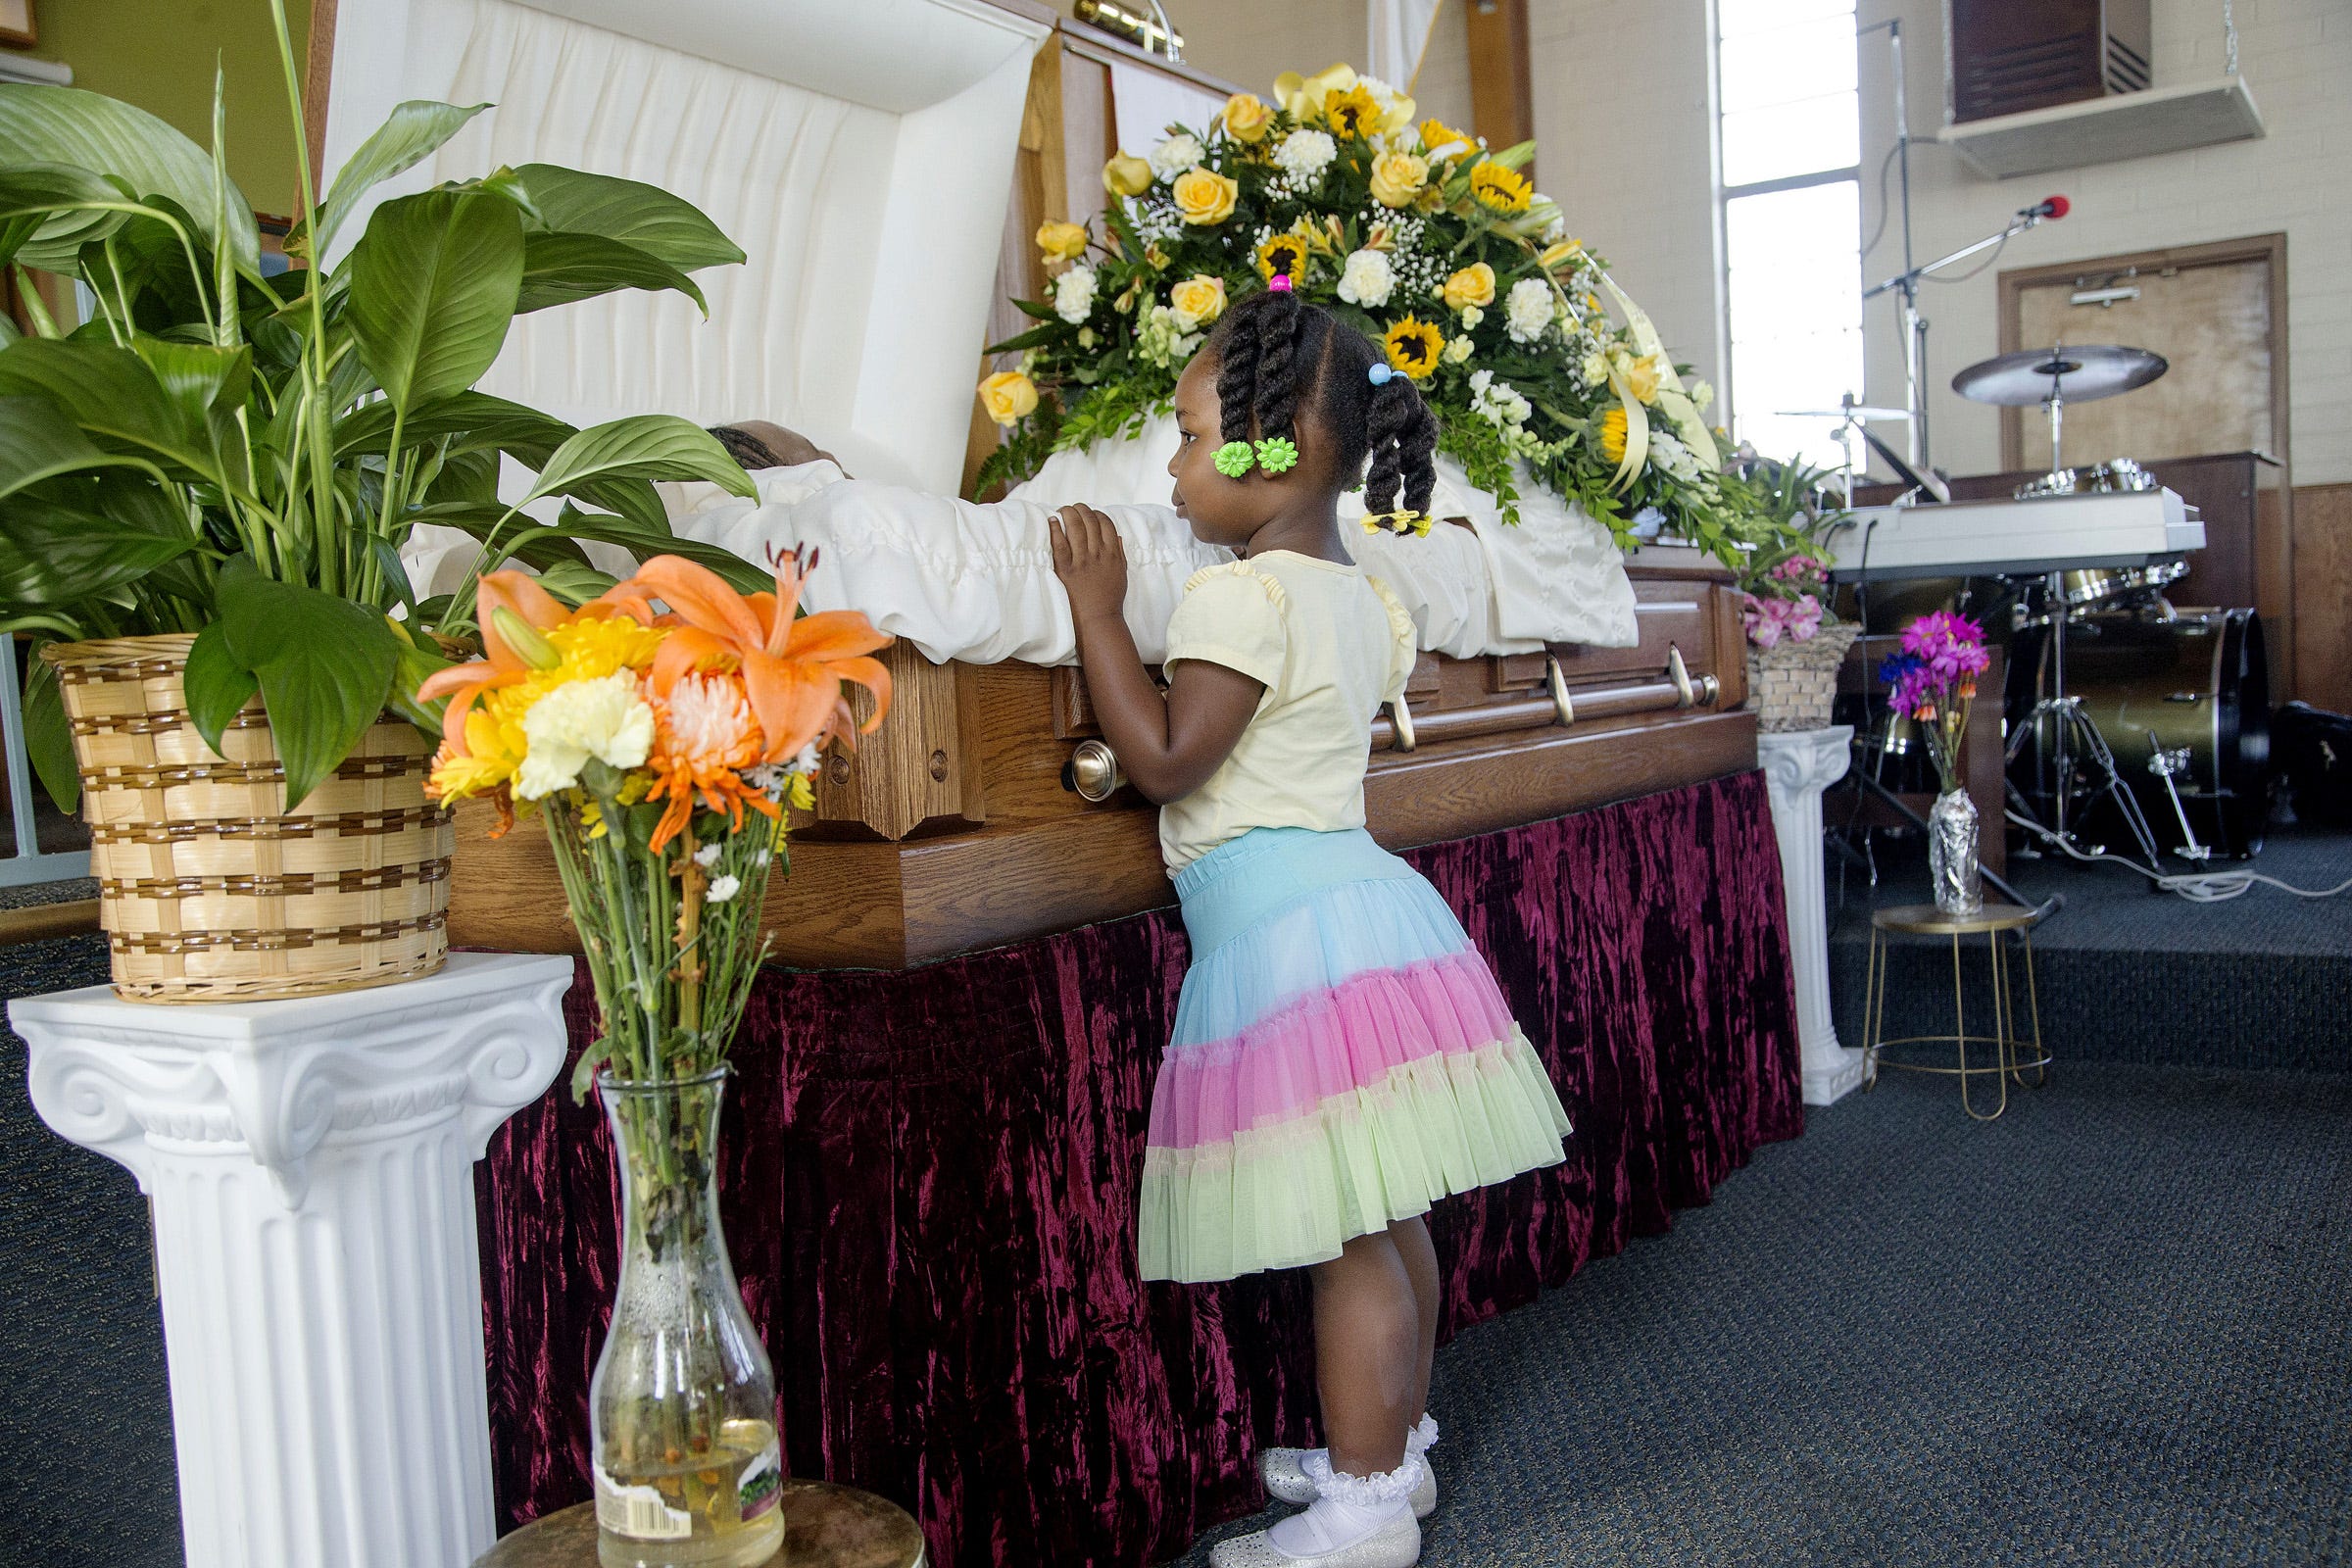 Adaya Lamb- Wilson, 3, gets a final glance of her deceased aunt Michelle Cusseaux during the funeral services at Emmanuel Church Of God In Christ in Phoenix, Az., on August 23, 2014. Cusseaux was fatally shot by Phoenix police.